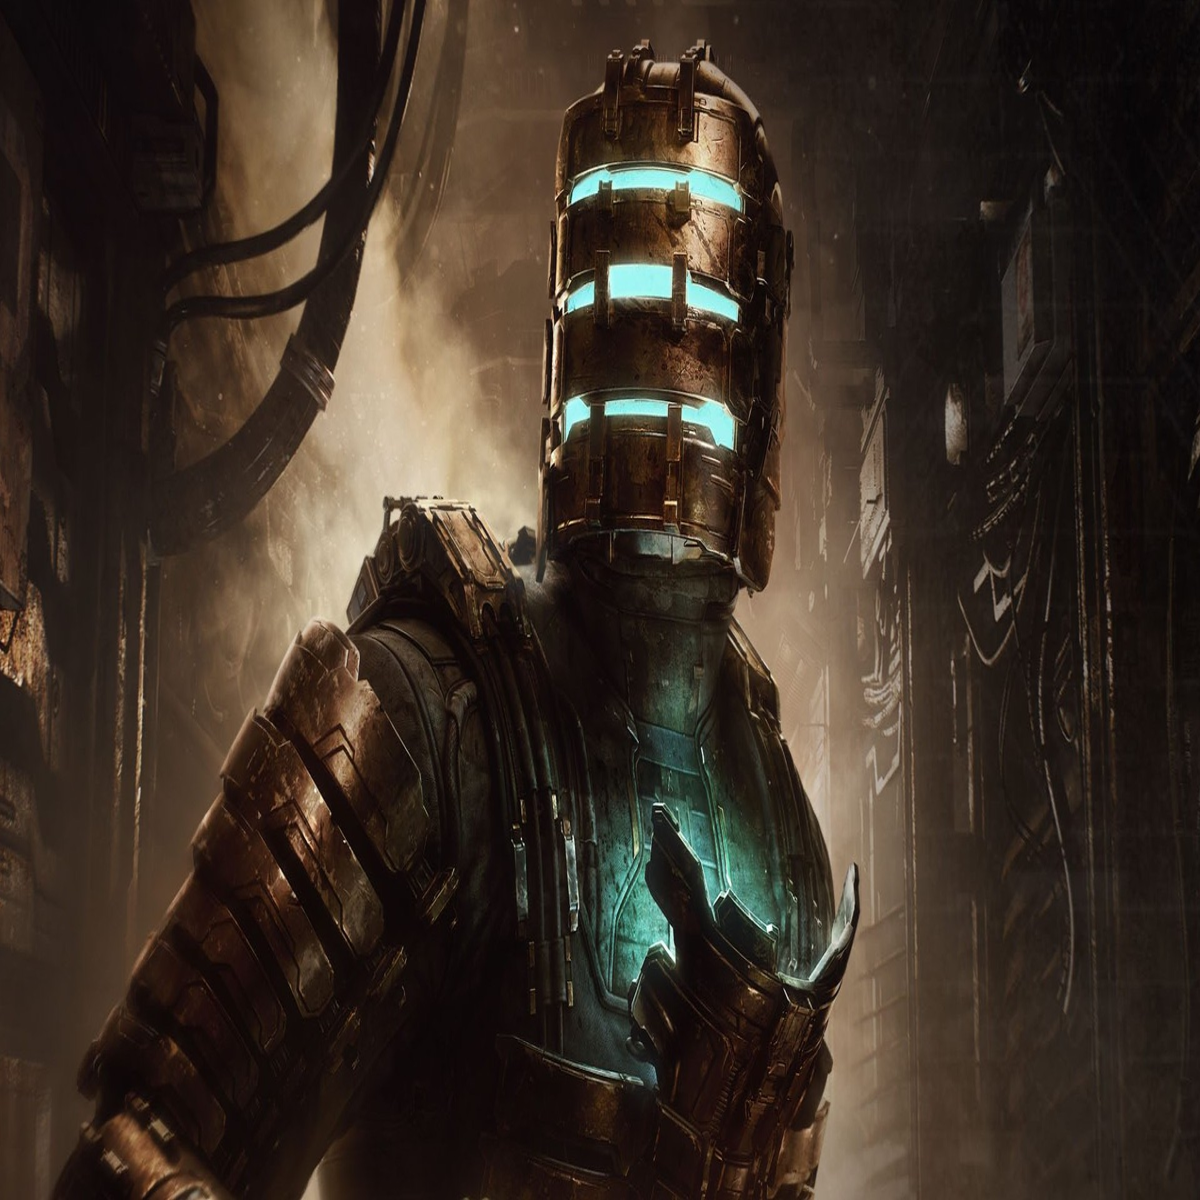 Chapter 4 - Obliteration Imminent - Dead Space Guide - IGN